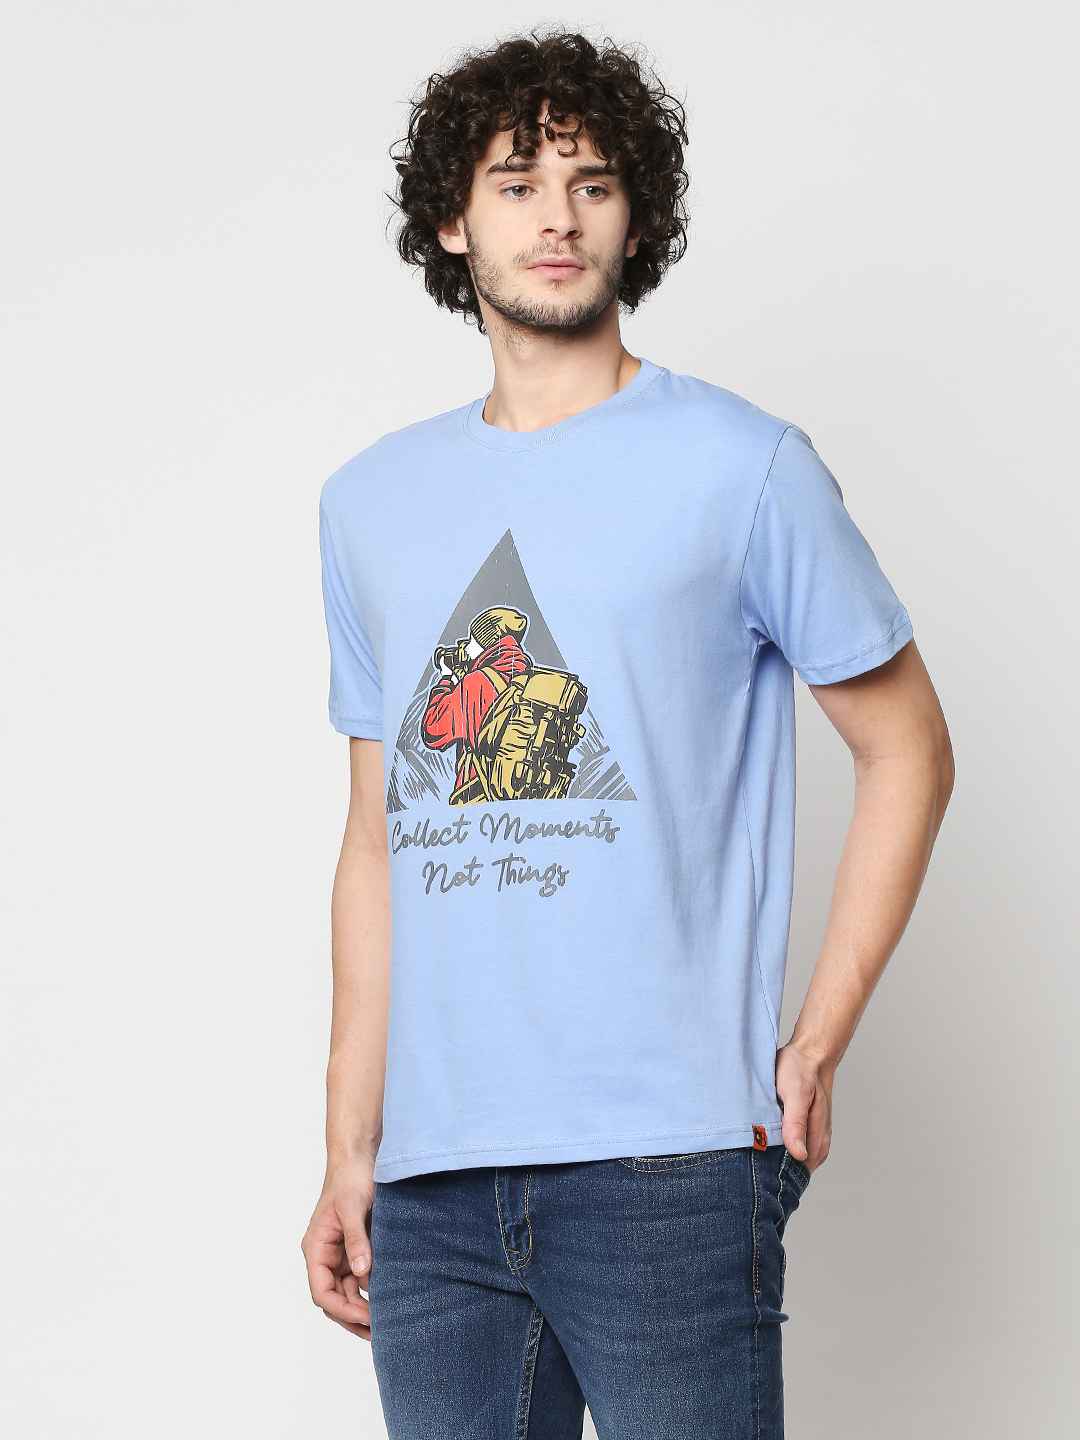 Buy Men's Powder blue Comfort fit T-shirt with chest print.